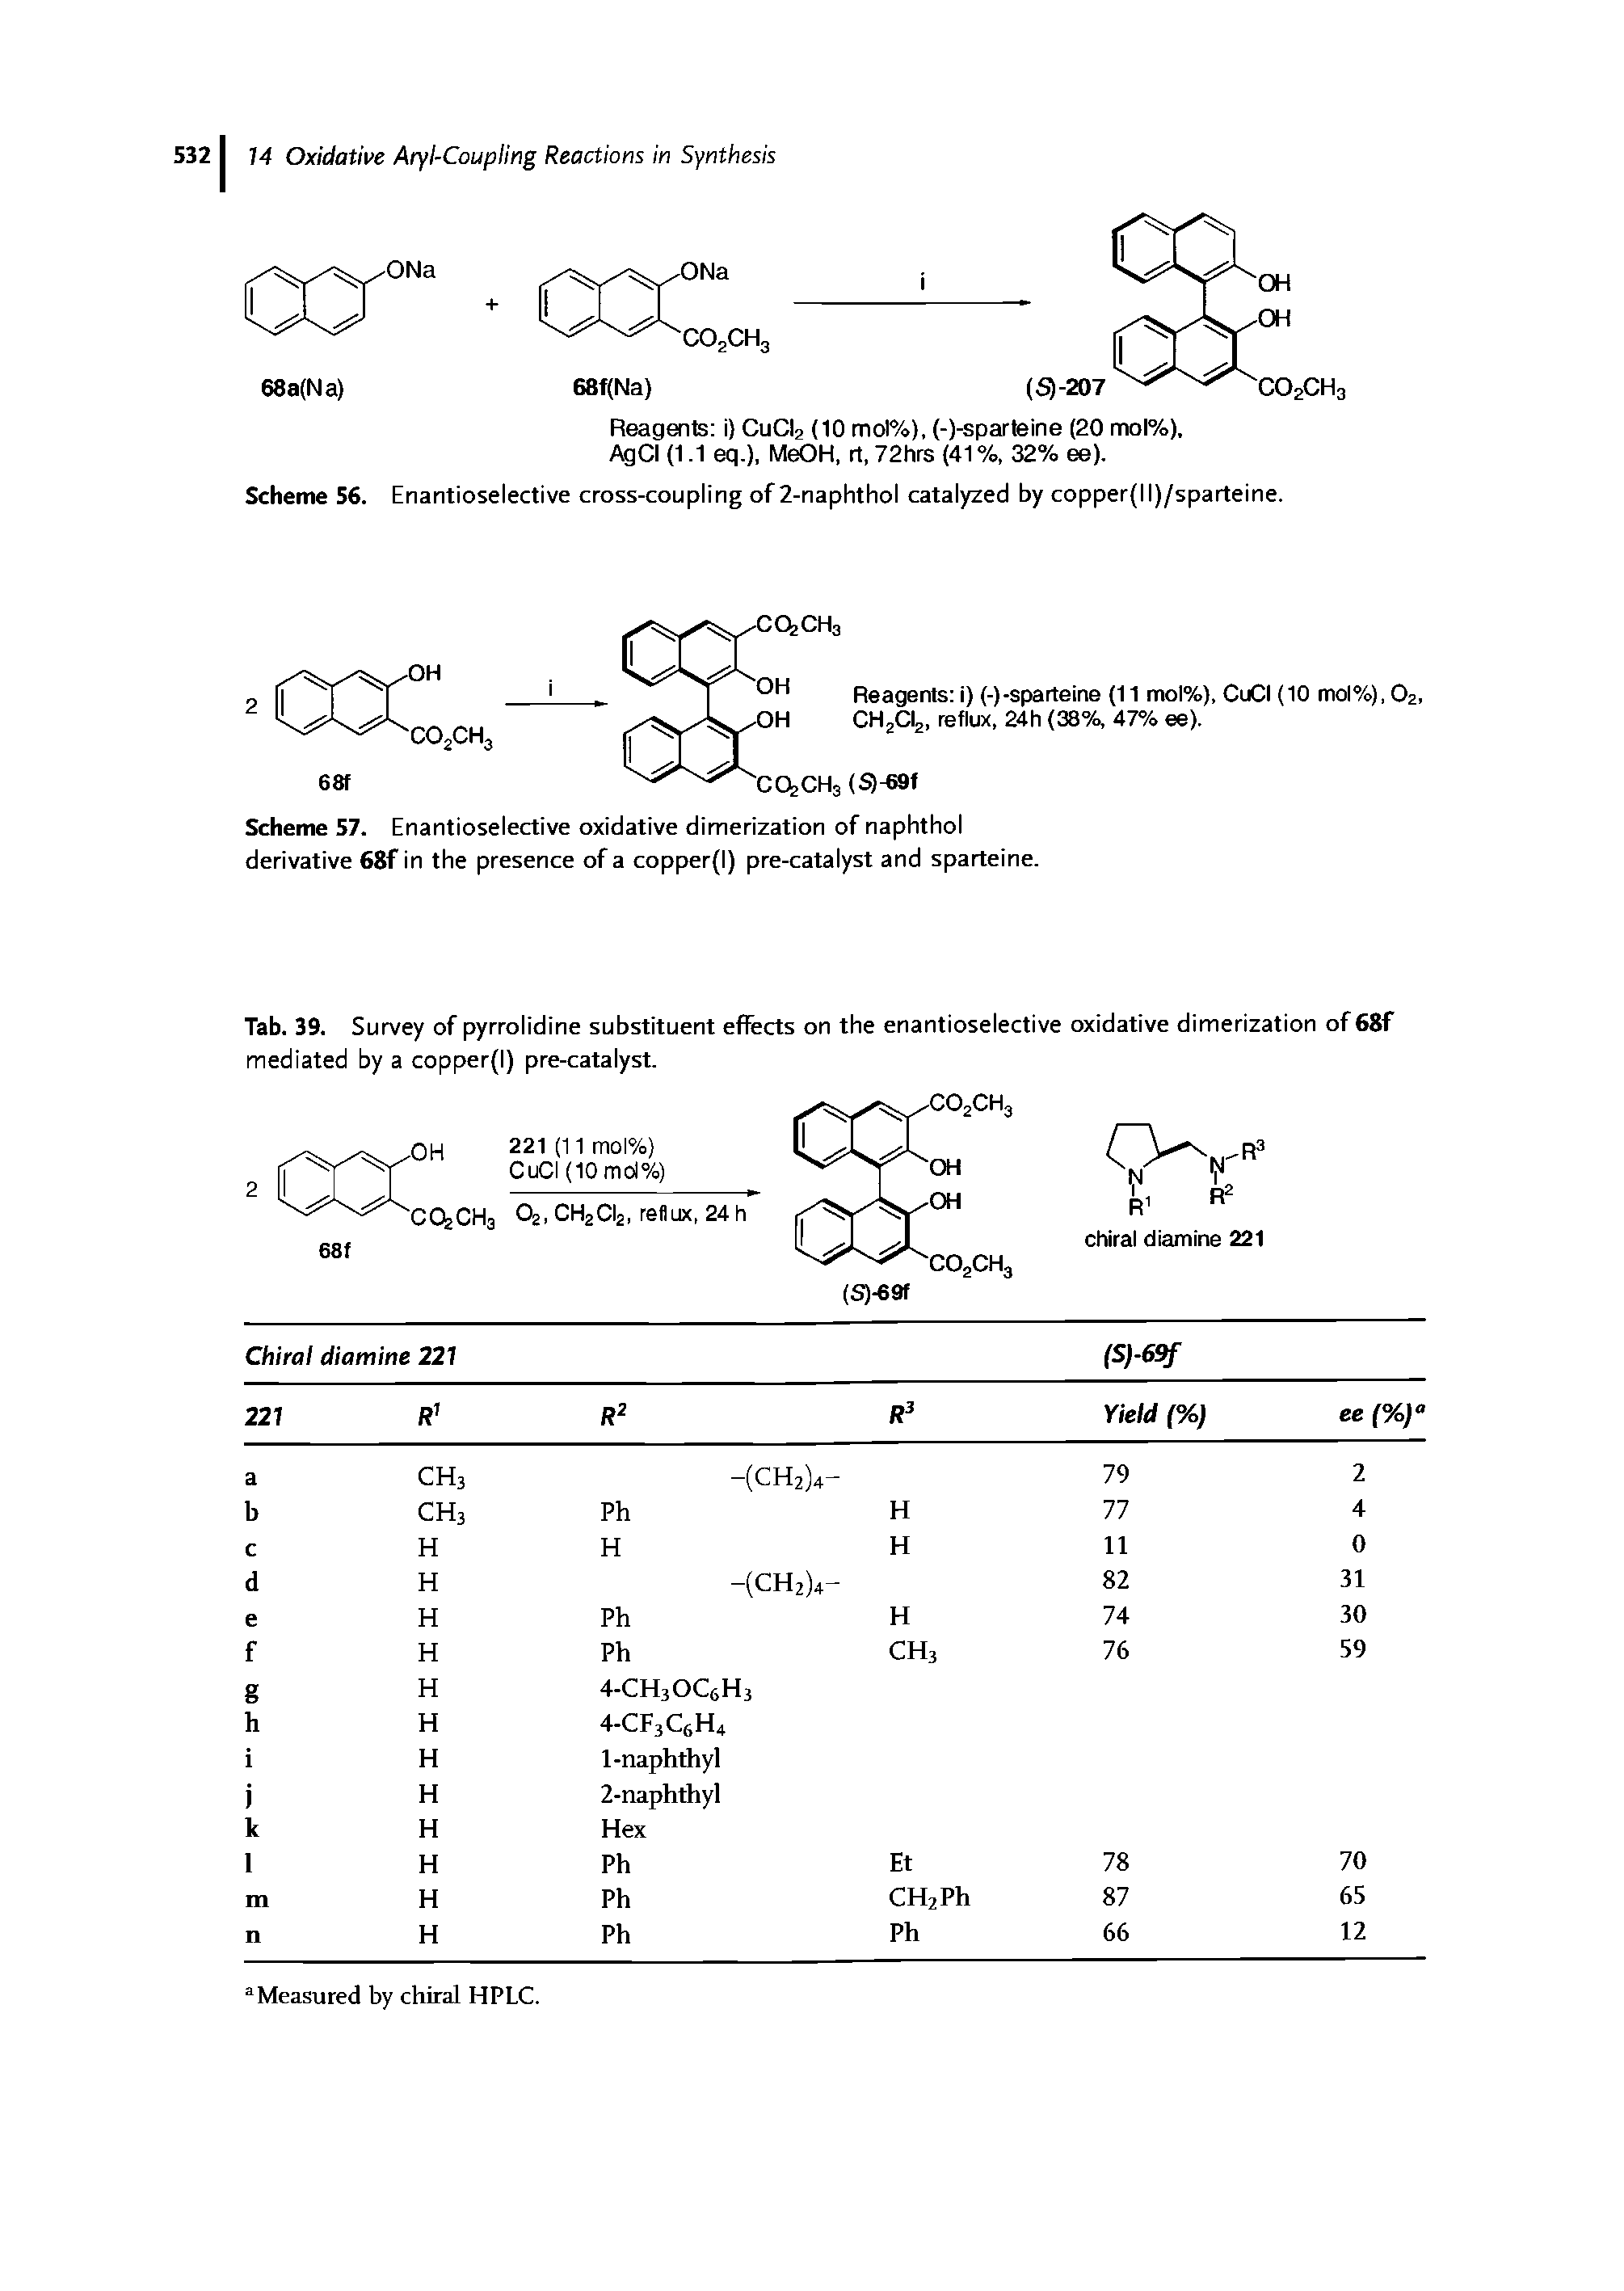 Scheme 57. Enantioselective oxidative dimerization of naphthol derivative 68f in the presence of a copper(l) pre-catalyst and sparteine.